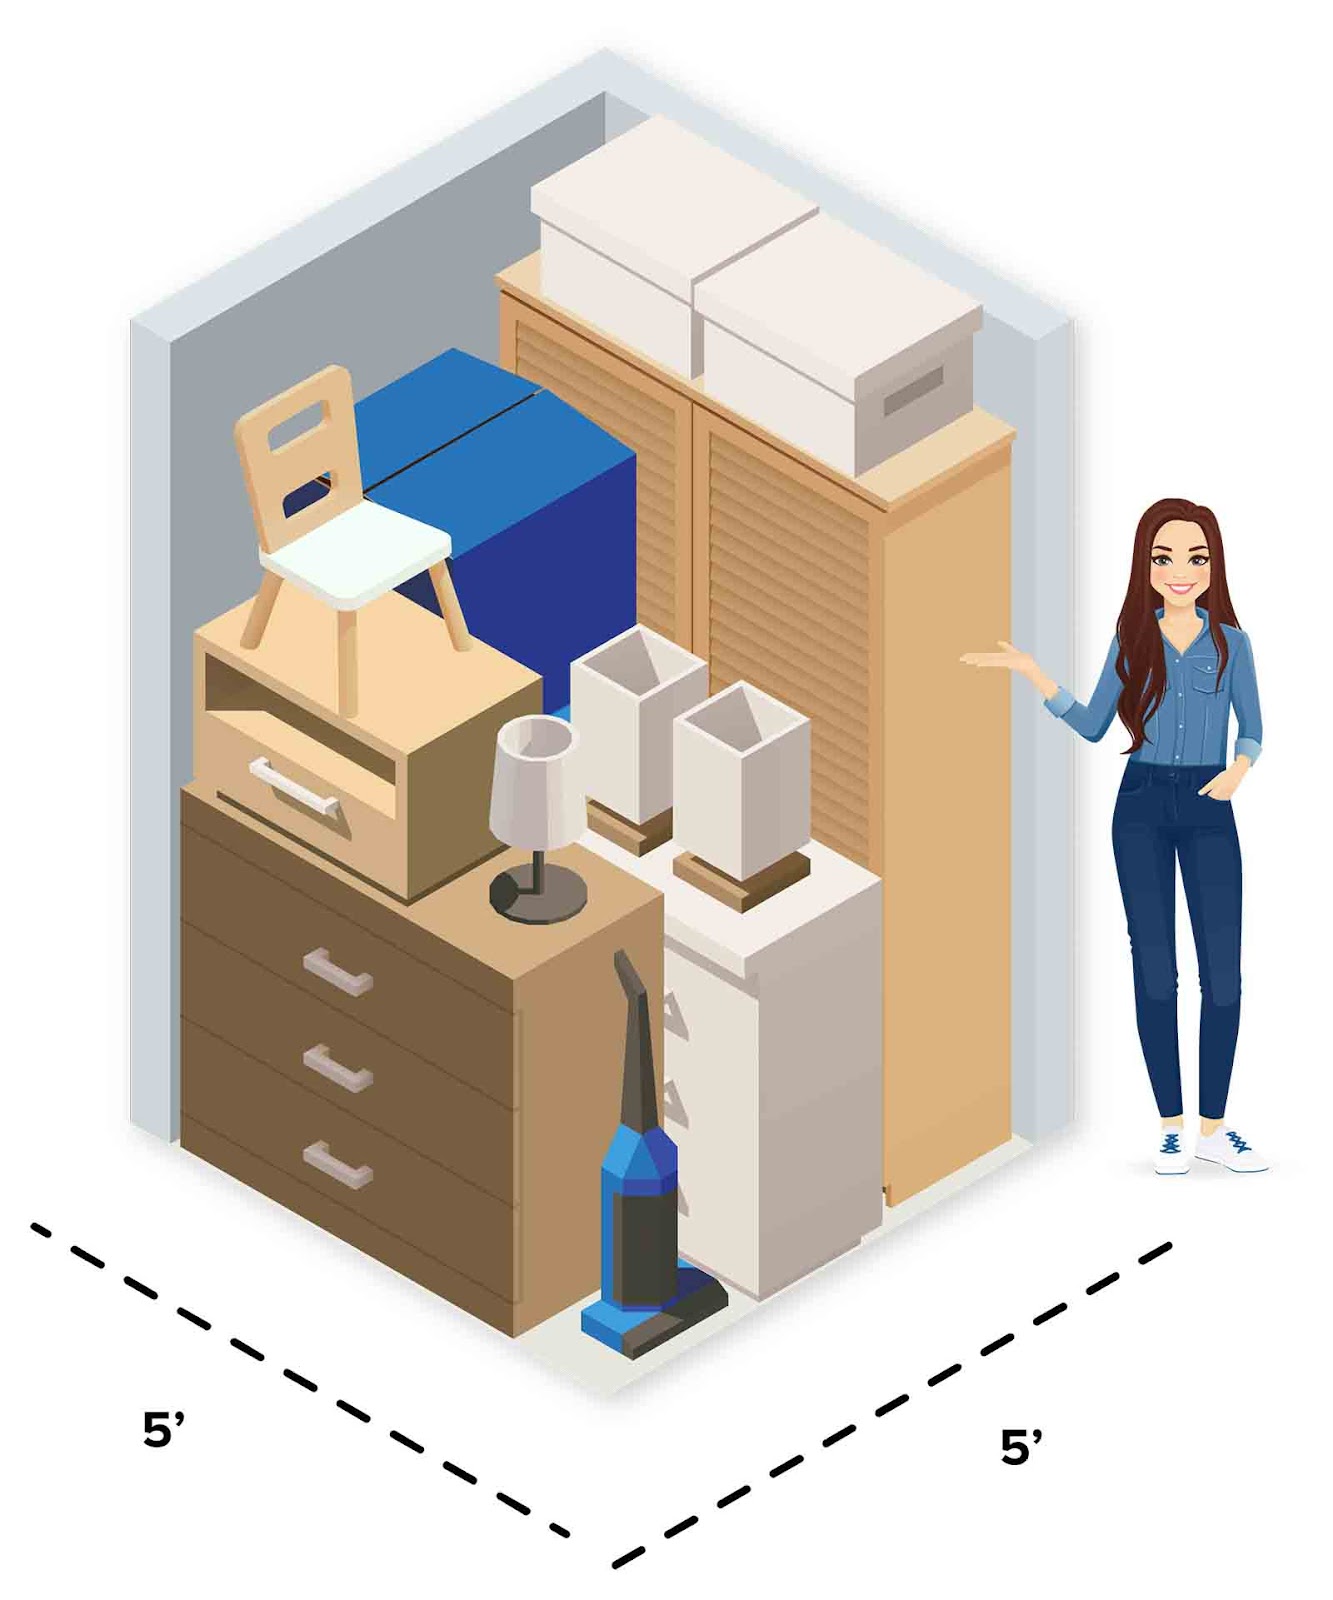 Here’s an idea of what you can fit in each size:  Small Units  5x5 or 25 sq. ft.  Small mini-storage units are a great solution for people who have limited space in their homes. They can accommodate items like sports equipment, garden tools, and boxes.   In a 5x5 storage unit, you can store:   A small closet's worth of belongings A desk and chair A few boxes Instruments (You may want to look for a climate-controlled unit to protect instruments.) Temporary mini-storage rentals are especially popular among college students on summer vacation.  They’re also a convenient option for accountants, lawyers, and medical offices for document storage.